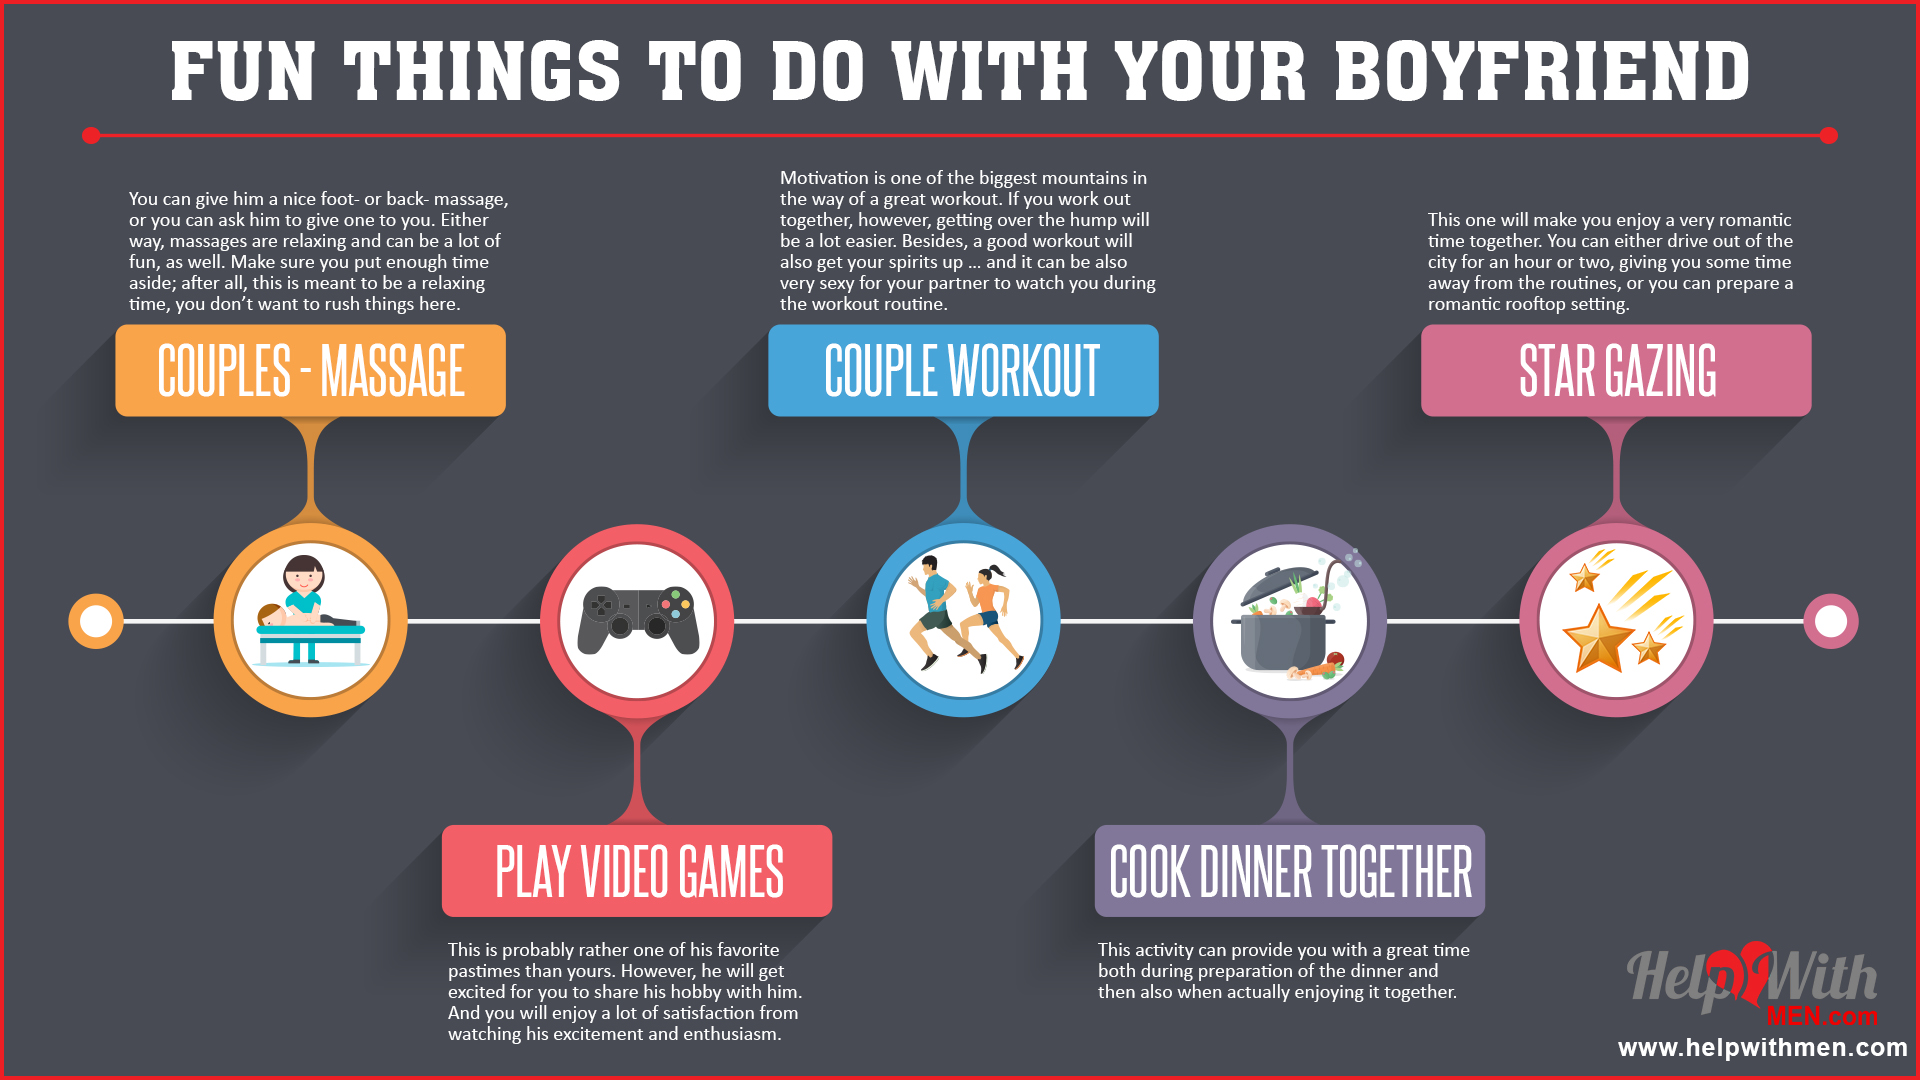 Boyfriend with home at to do things 15 Fun